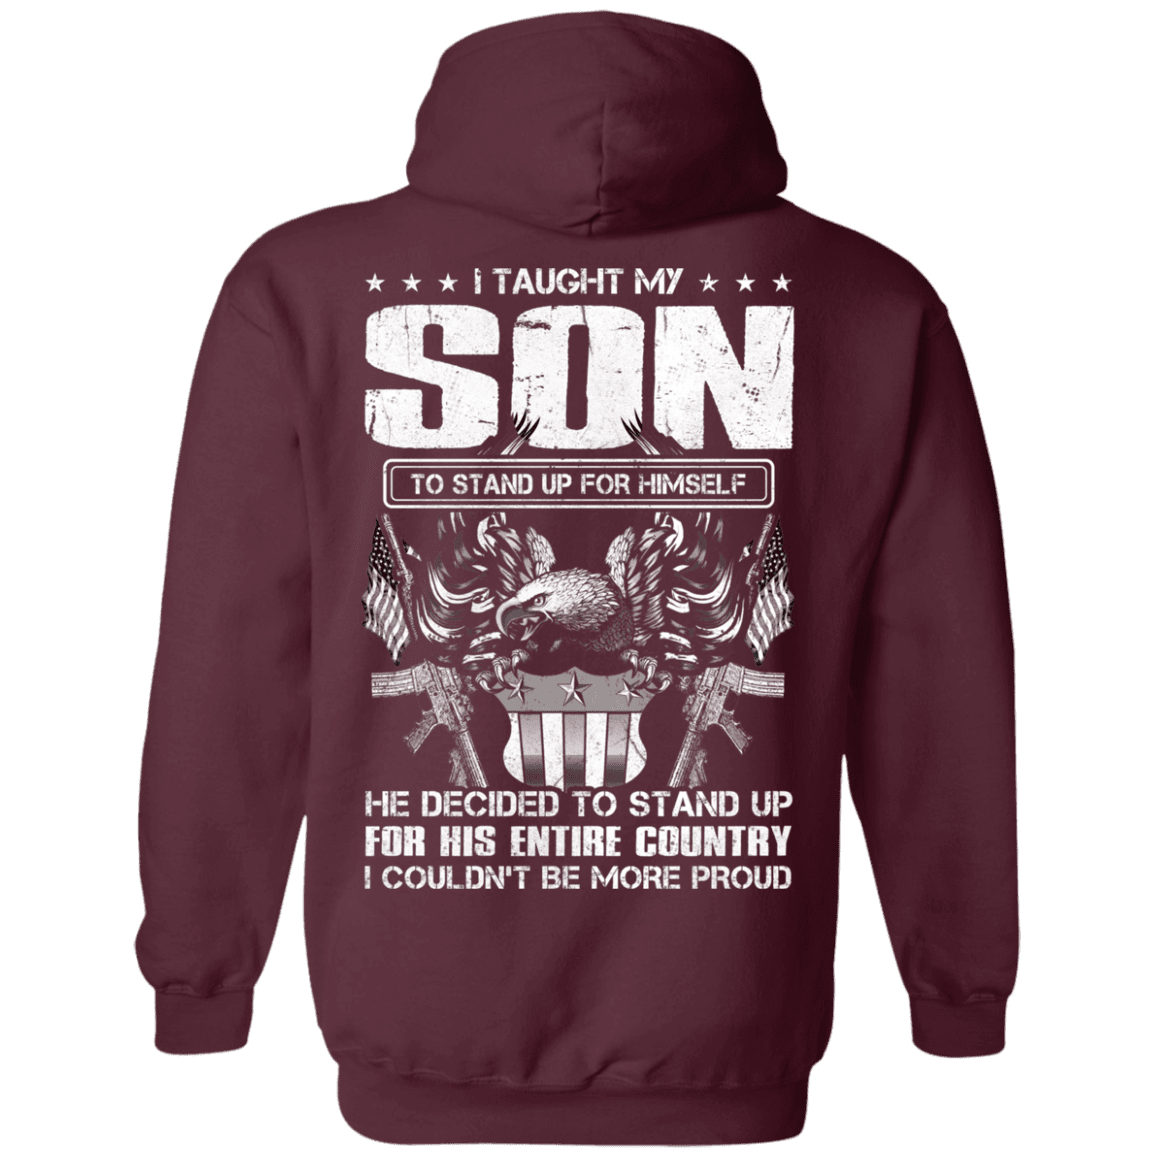 Military T-Shirt "Taught Son Stand up for Country" Men Back-TShirt-General-Veterans Nation